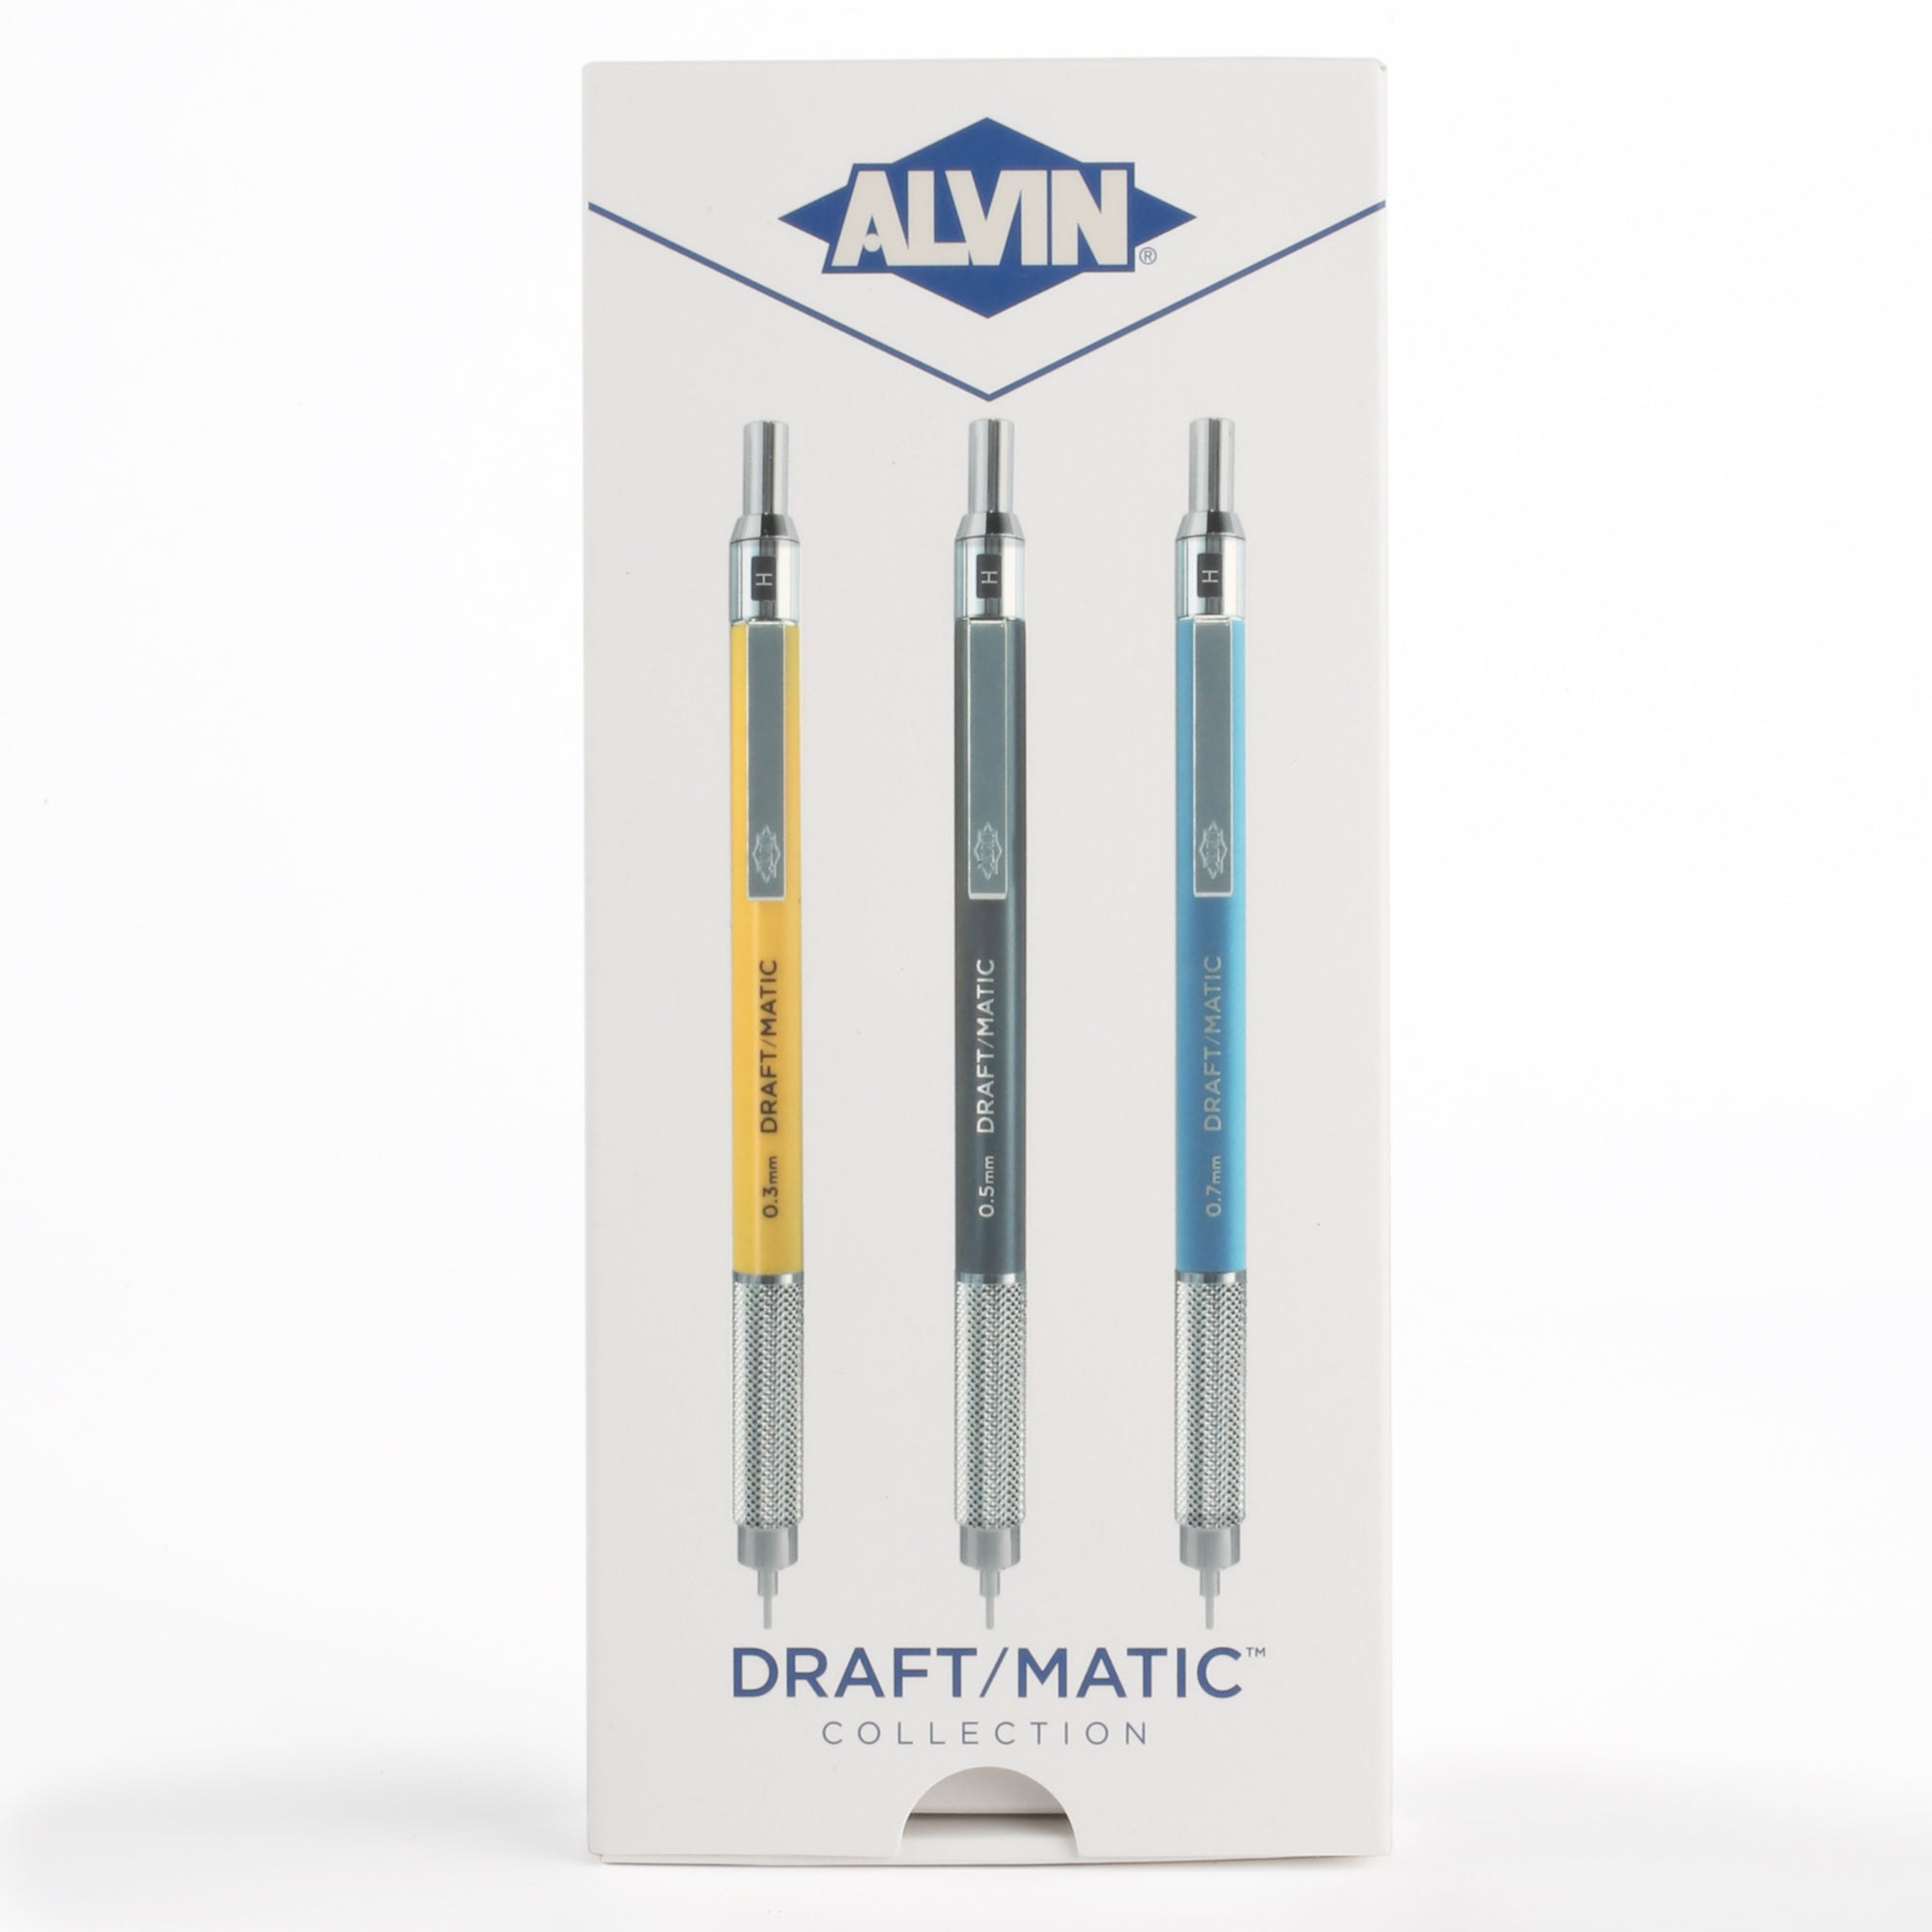 Draft/Matic Pencil Collection Set of 3 – ALVIN Drafting, LLC